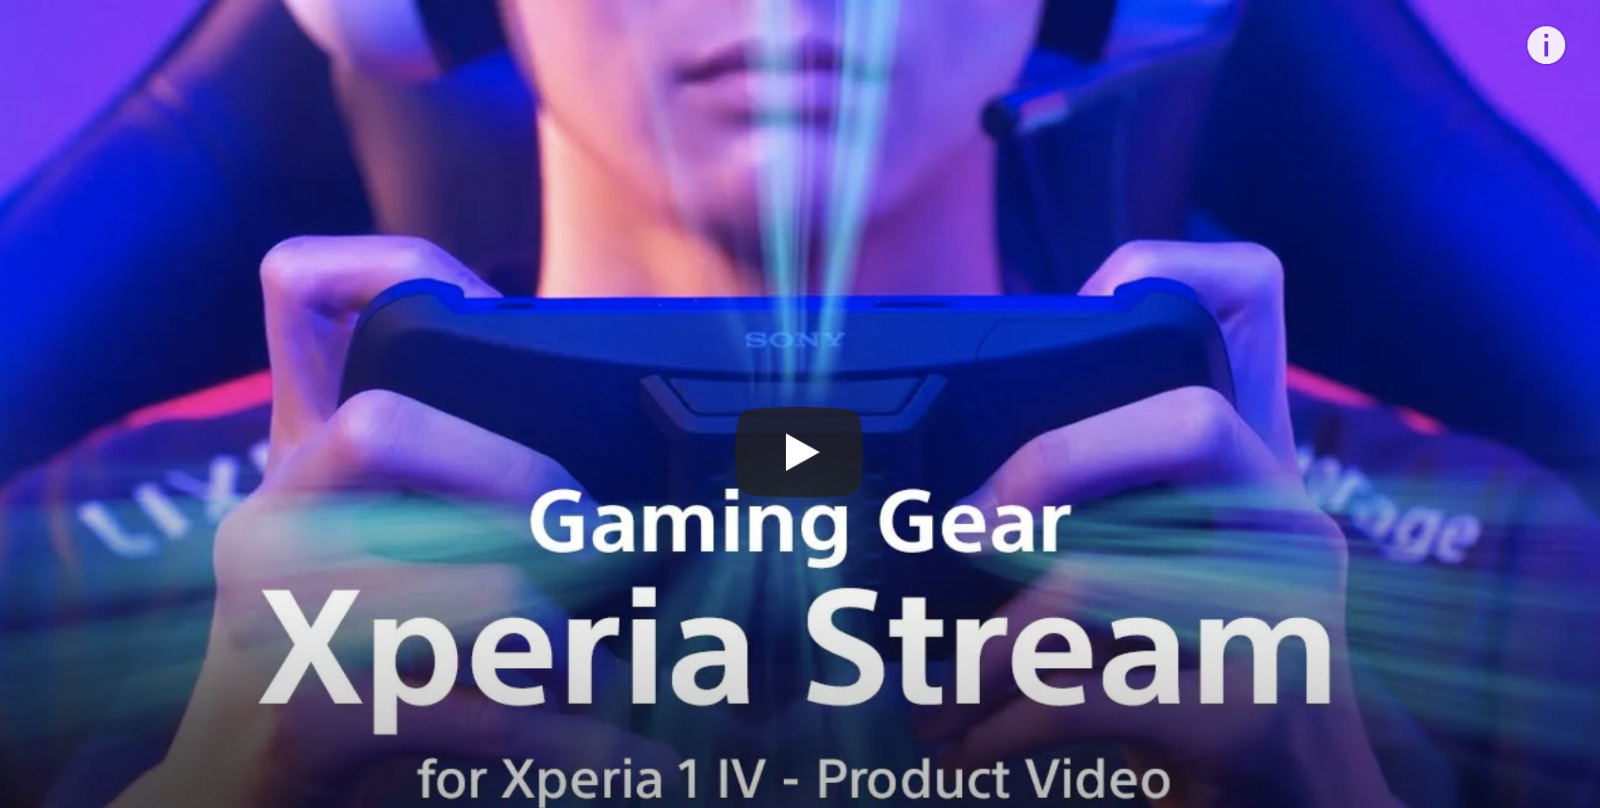 Gaming Gear Xperia Stream for Xperia 1 IV - Product Video